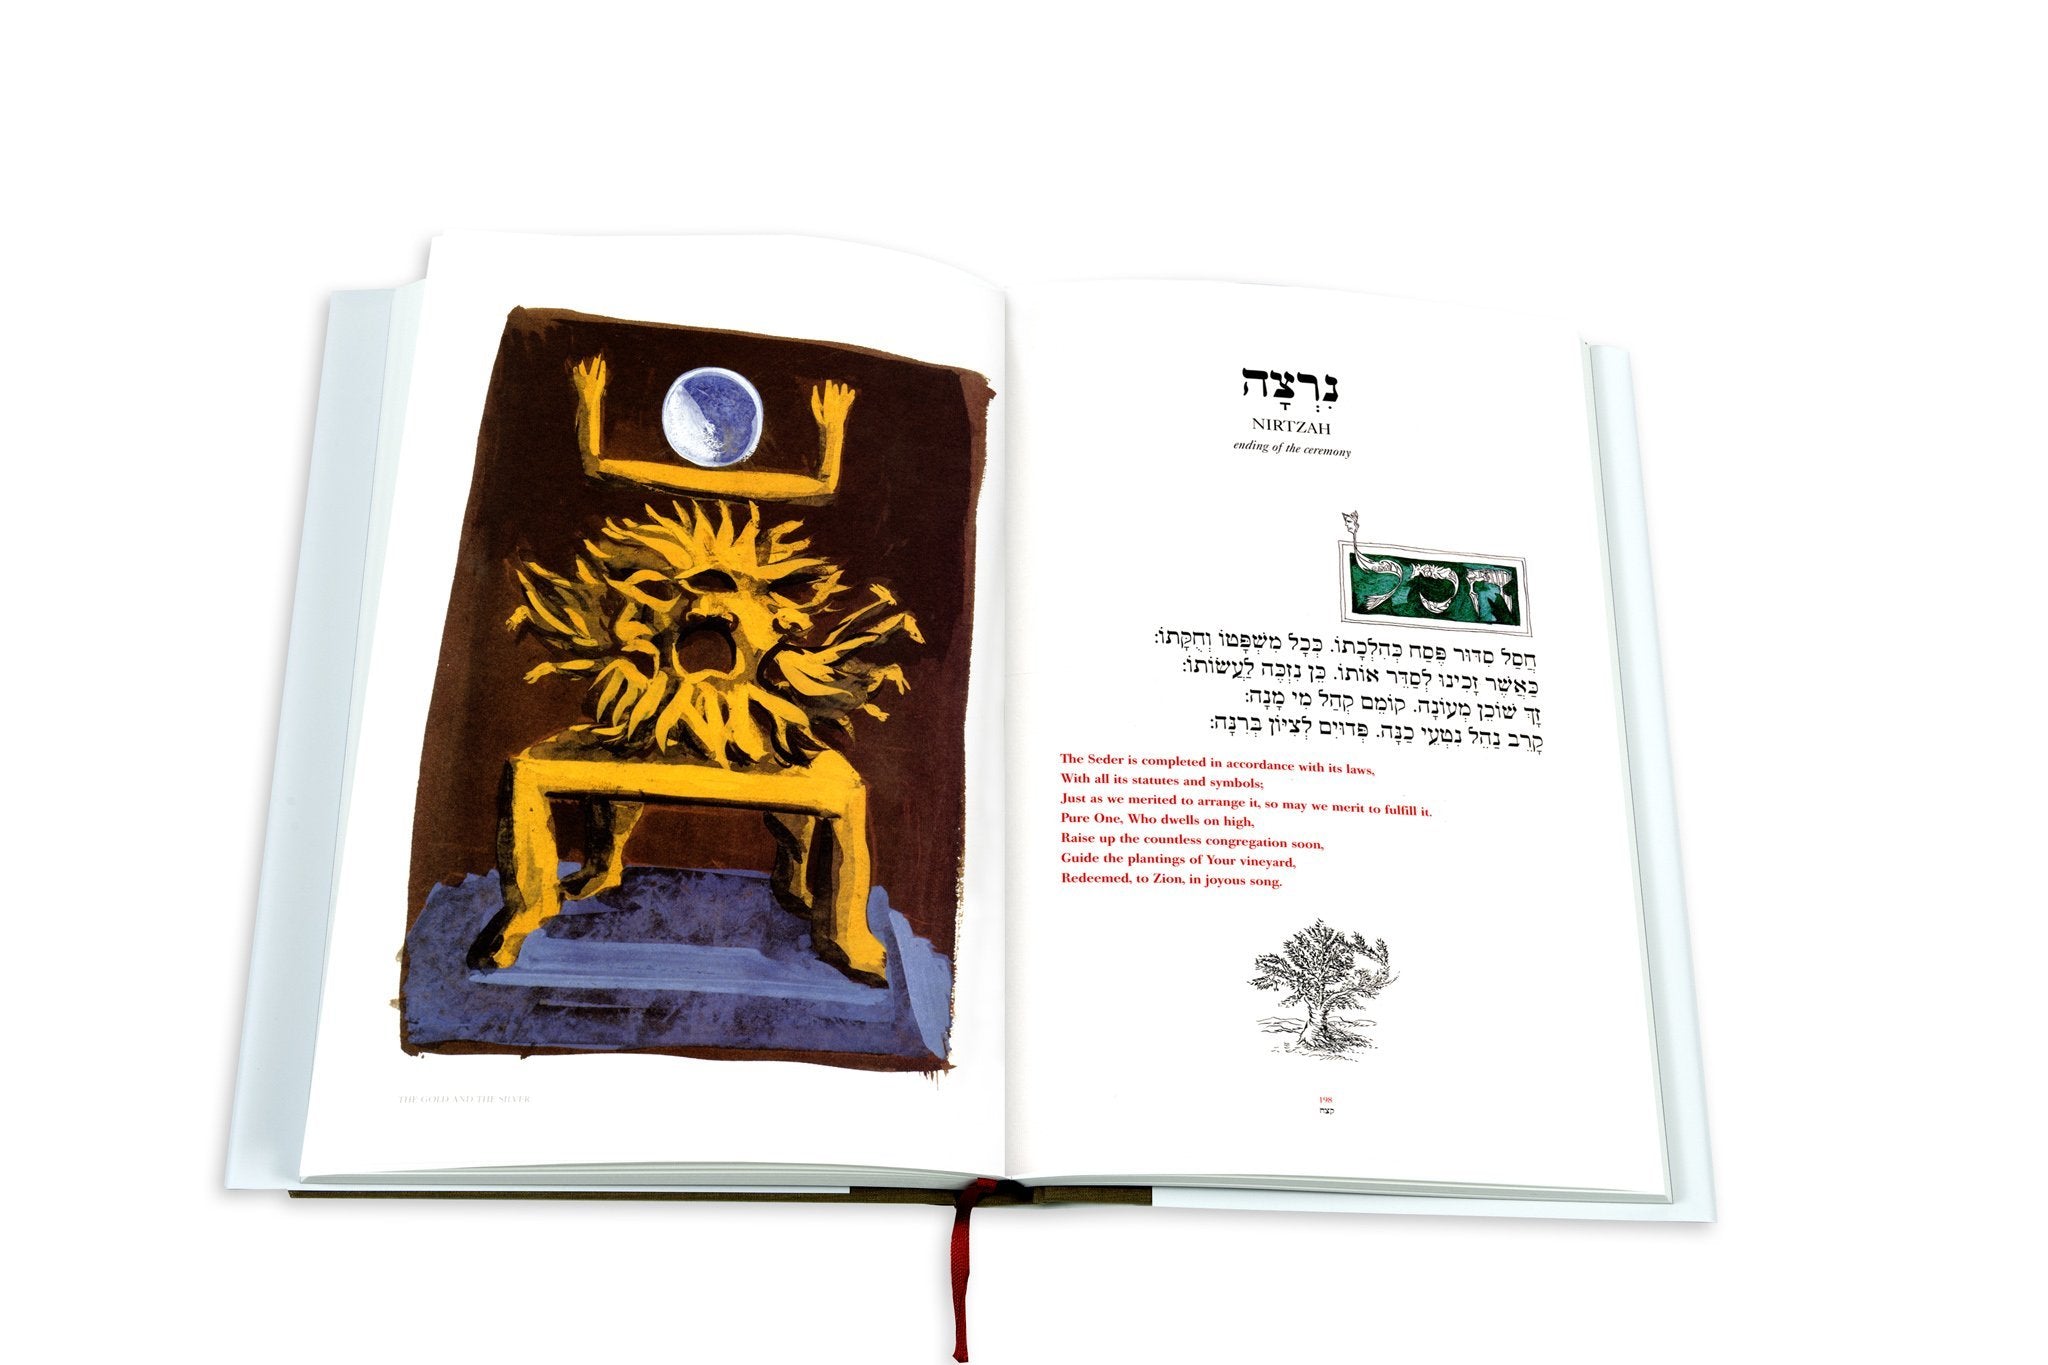 ASSOULINE Special Edition Haggadah Hardcover Book by Marc-Alain Ouaknin